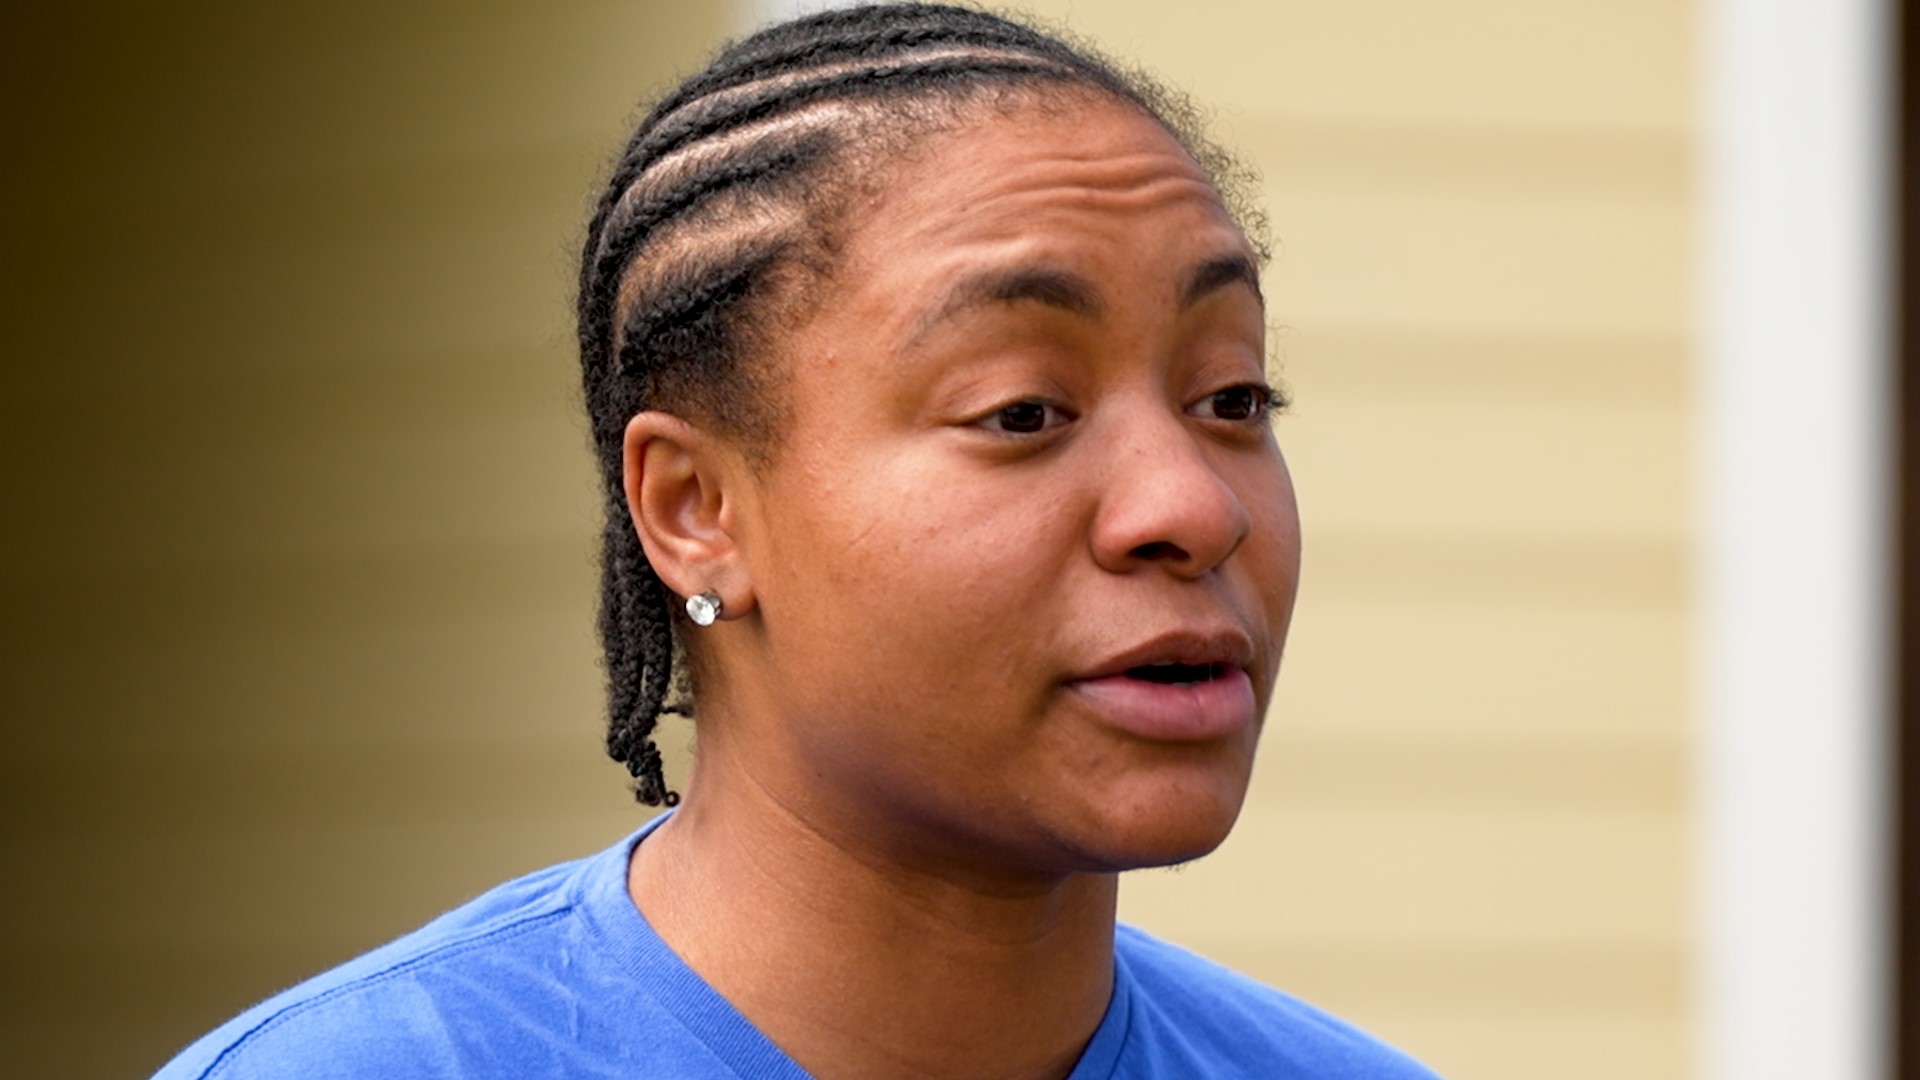 Police said they found the victims inside a crashed car on Easter Avenue on Sunday night. It happened right by Jasmine Corbin's home. This is her full interview.